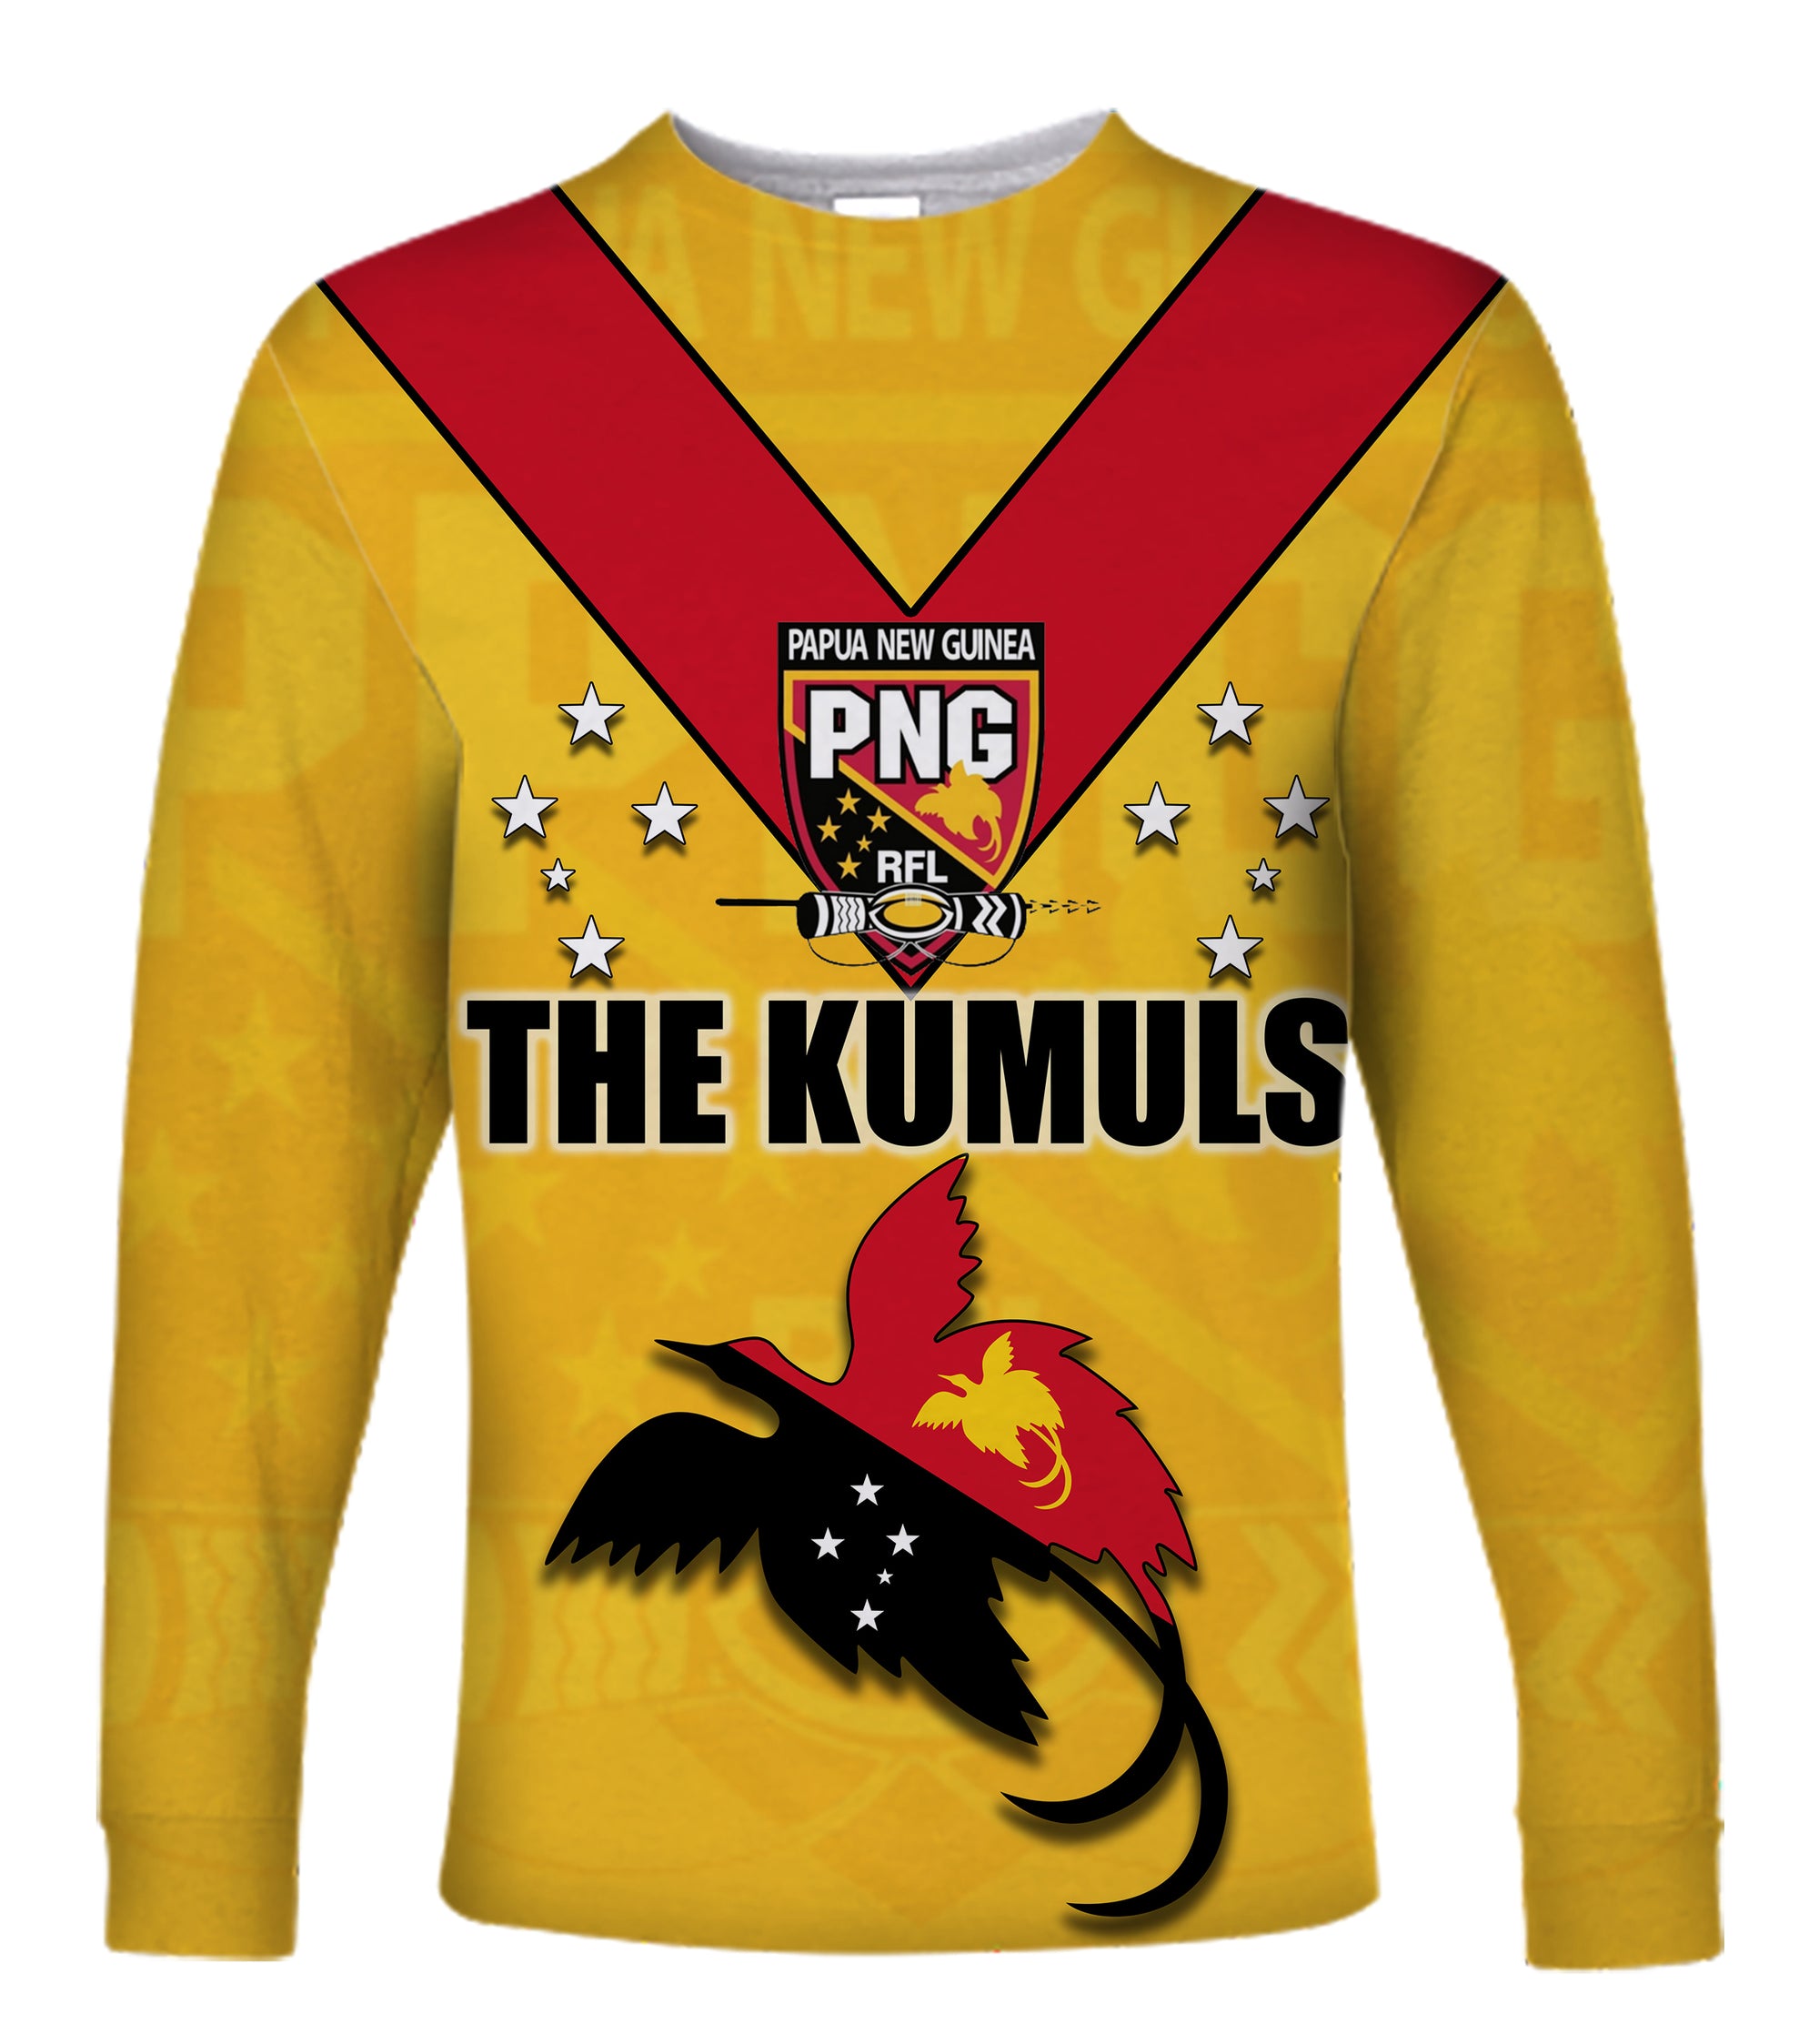 Papua New Guinea Rugby Long Sleeve Shirts - PNG The Kumuls - LT20 Unisex Blue - Polynesian Pride